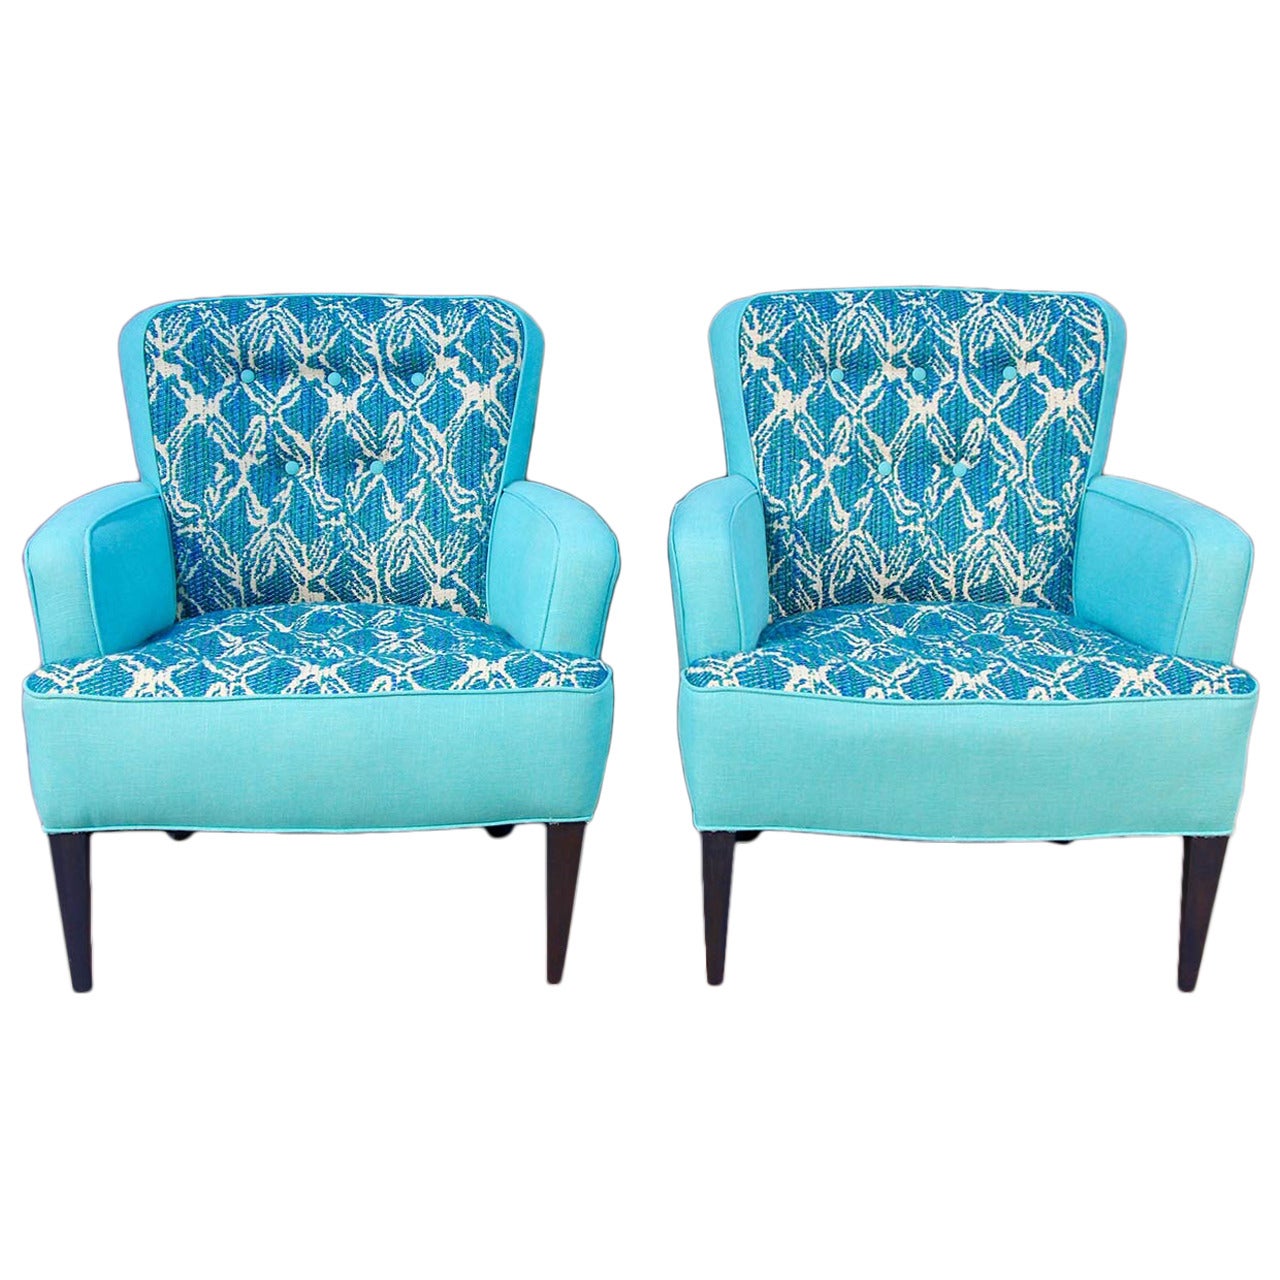 Pair of Turquoise Sala Chairs Draper Era For Sale